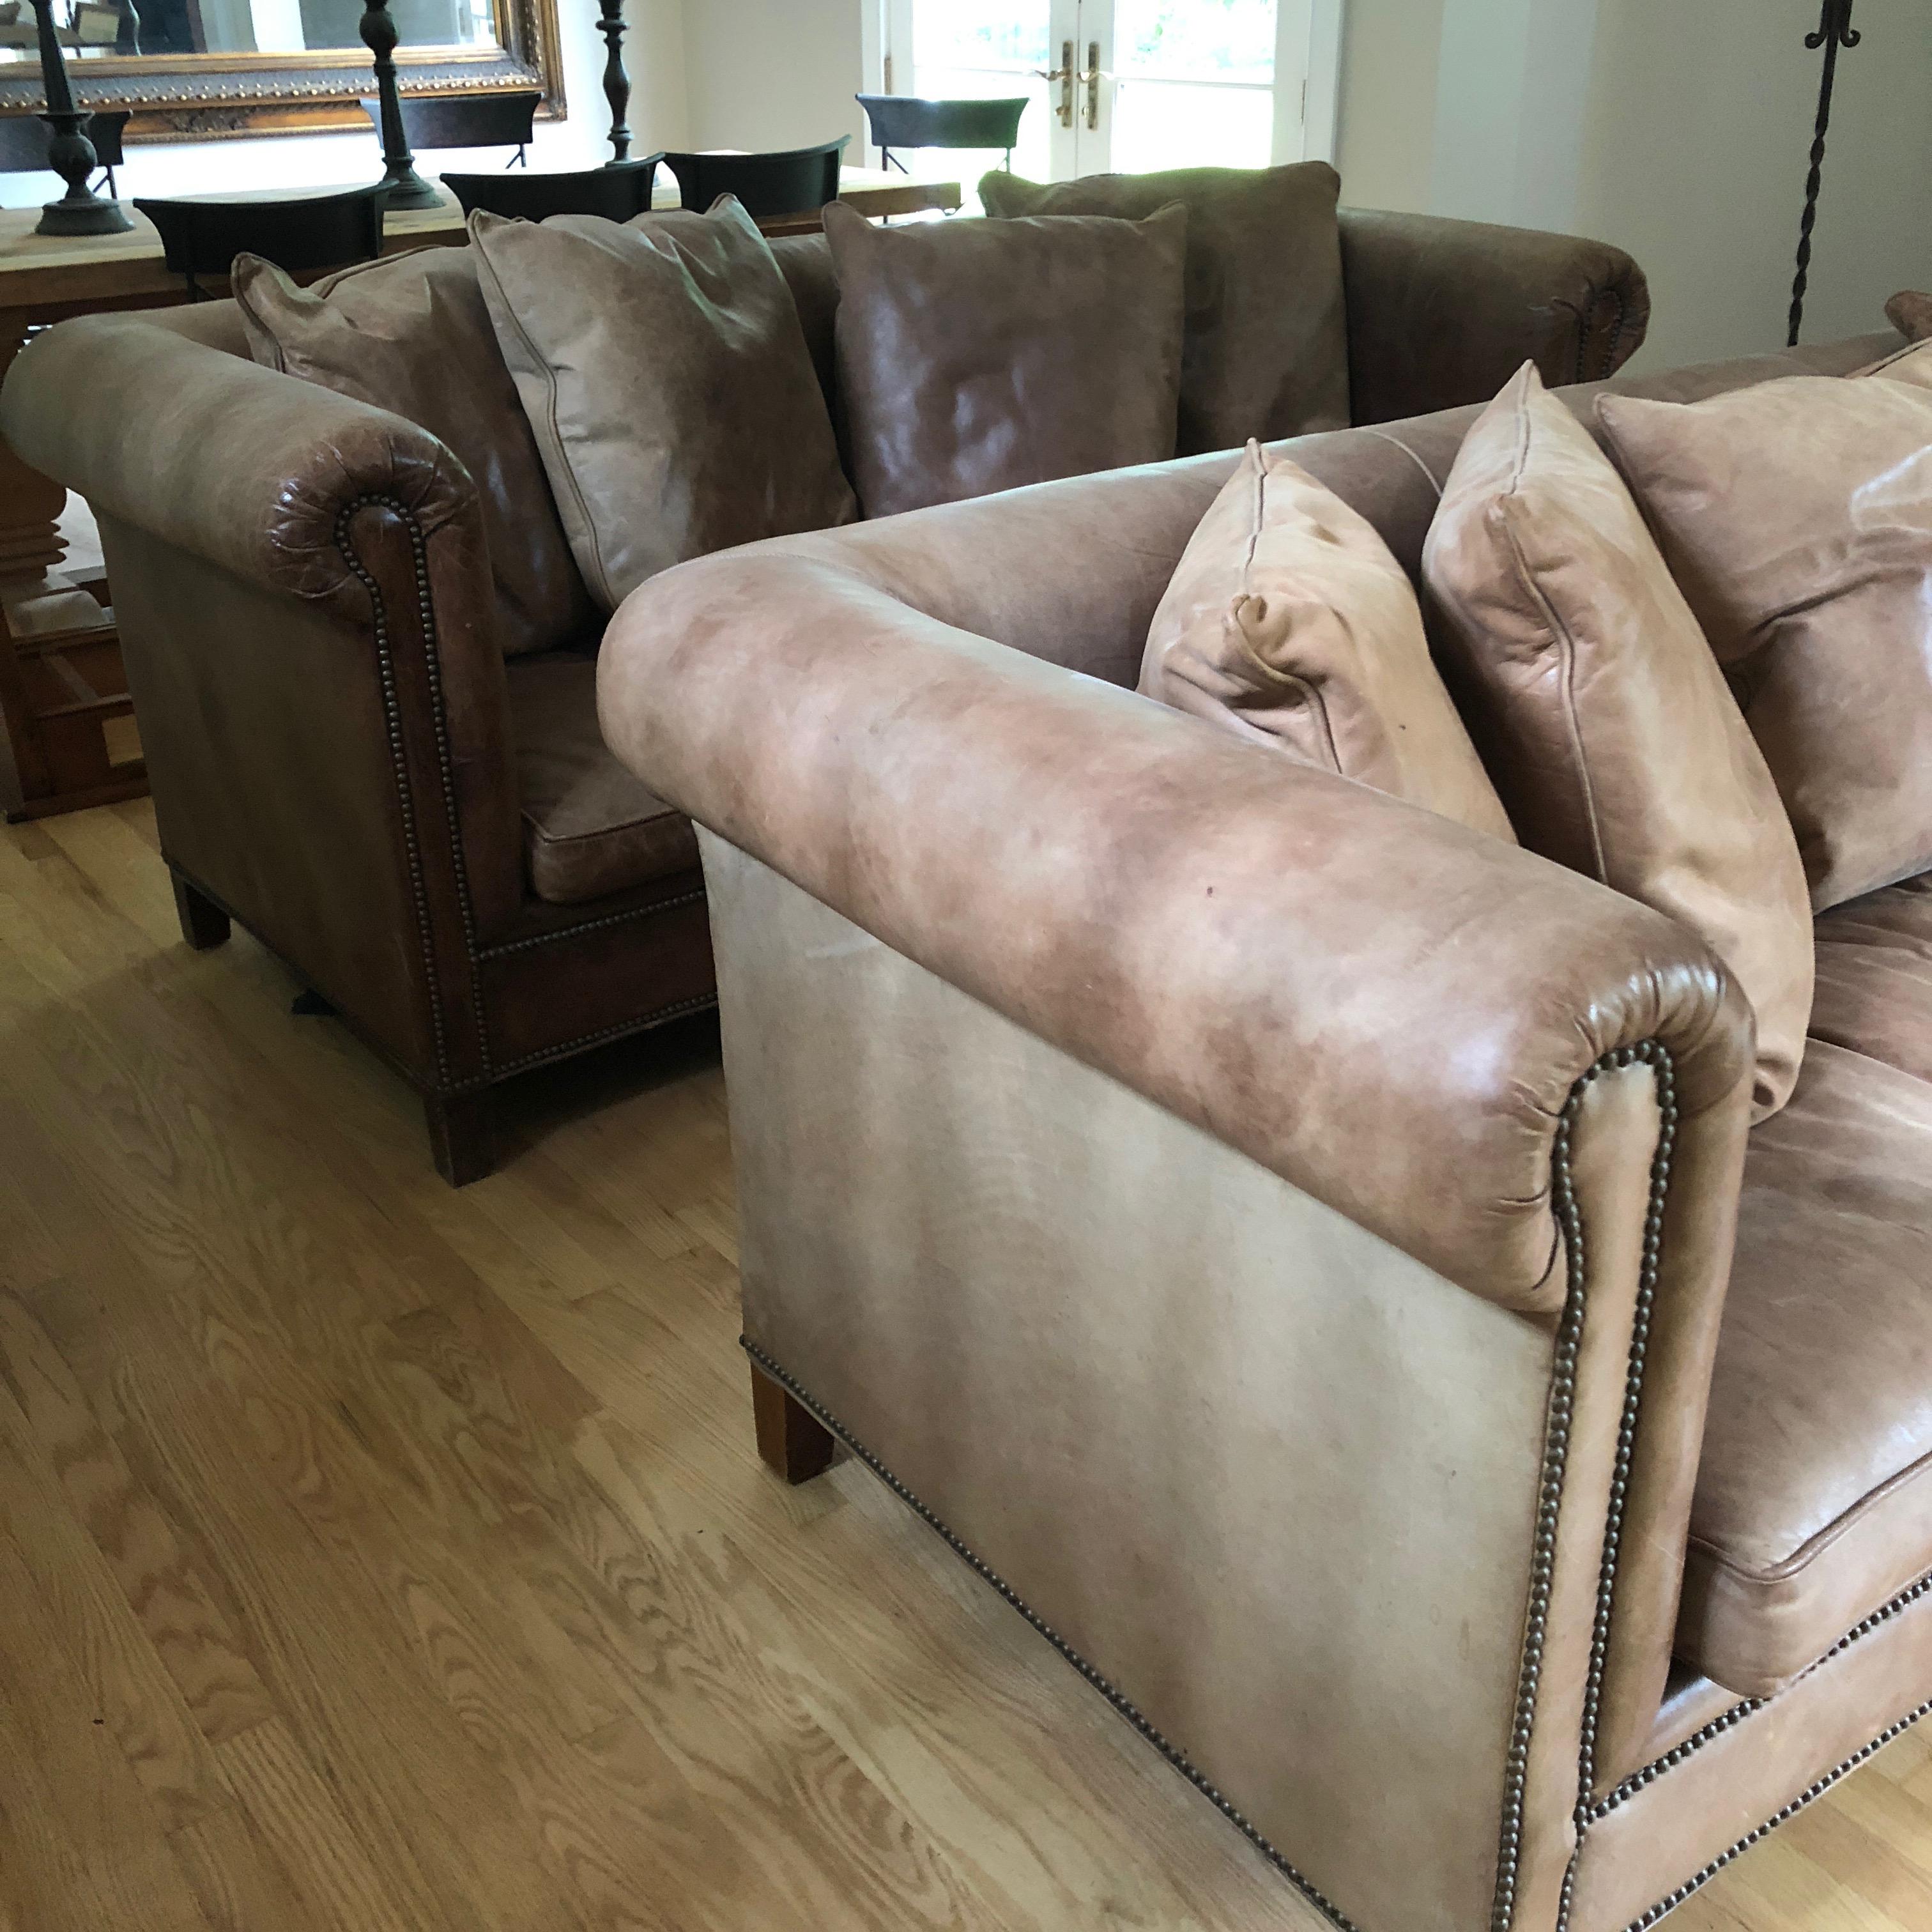 Yummy Pair of Soft Leather and Down Ralph Lauren Sofas 5